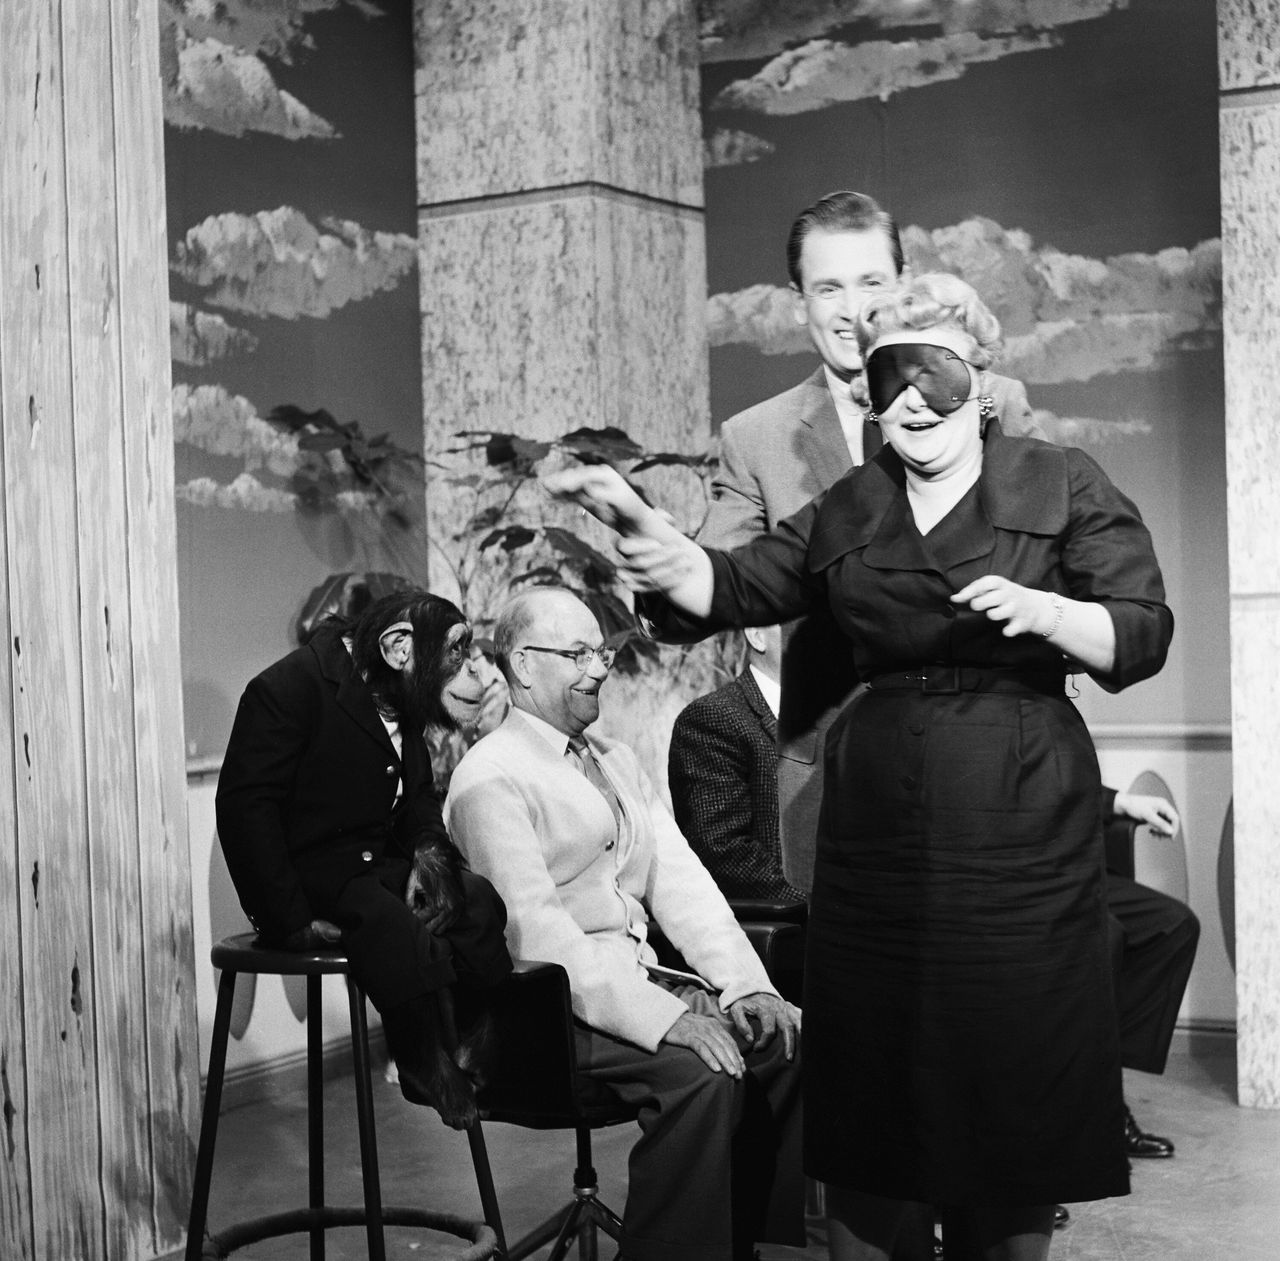 Bob Barker with contestants on "Truth or Consequences" in 1963.